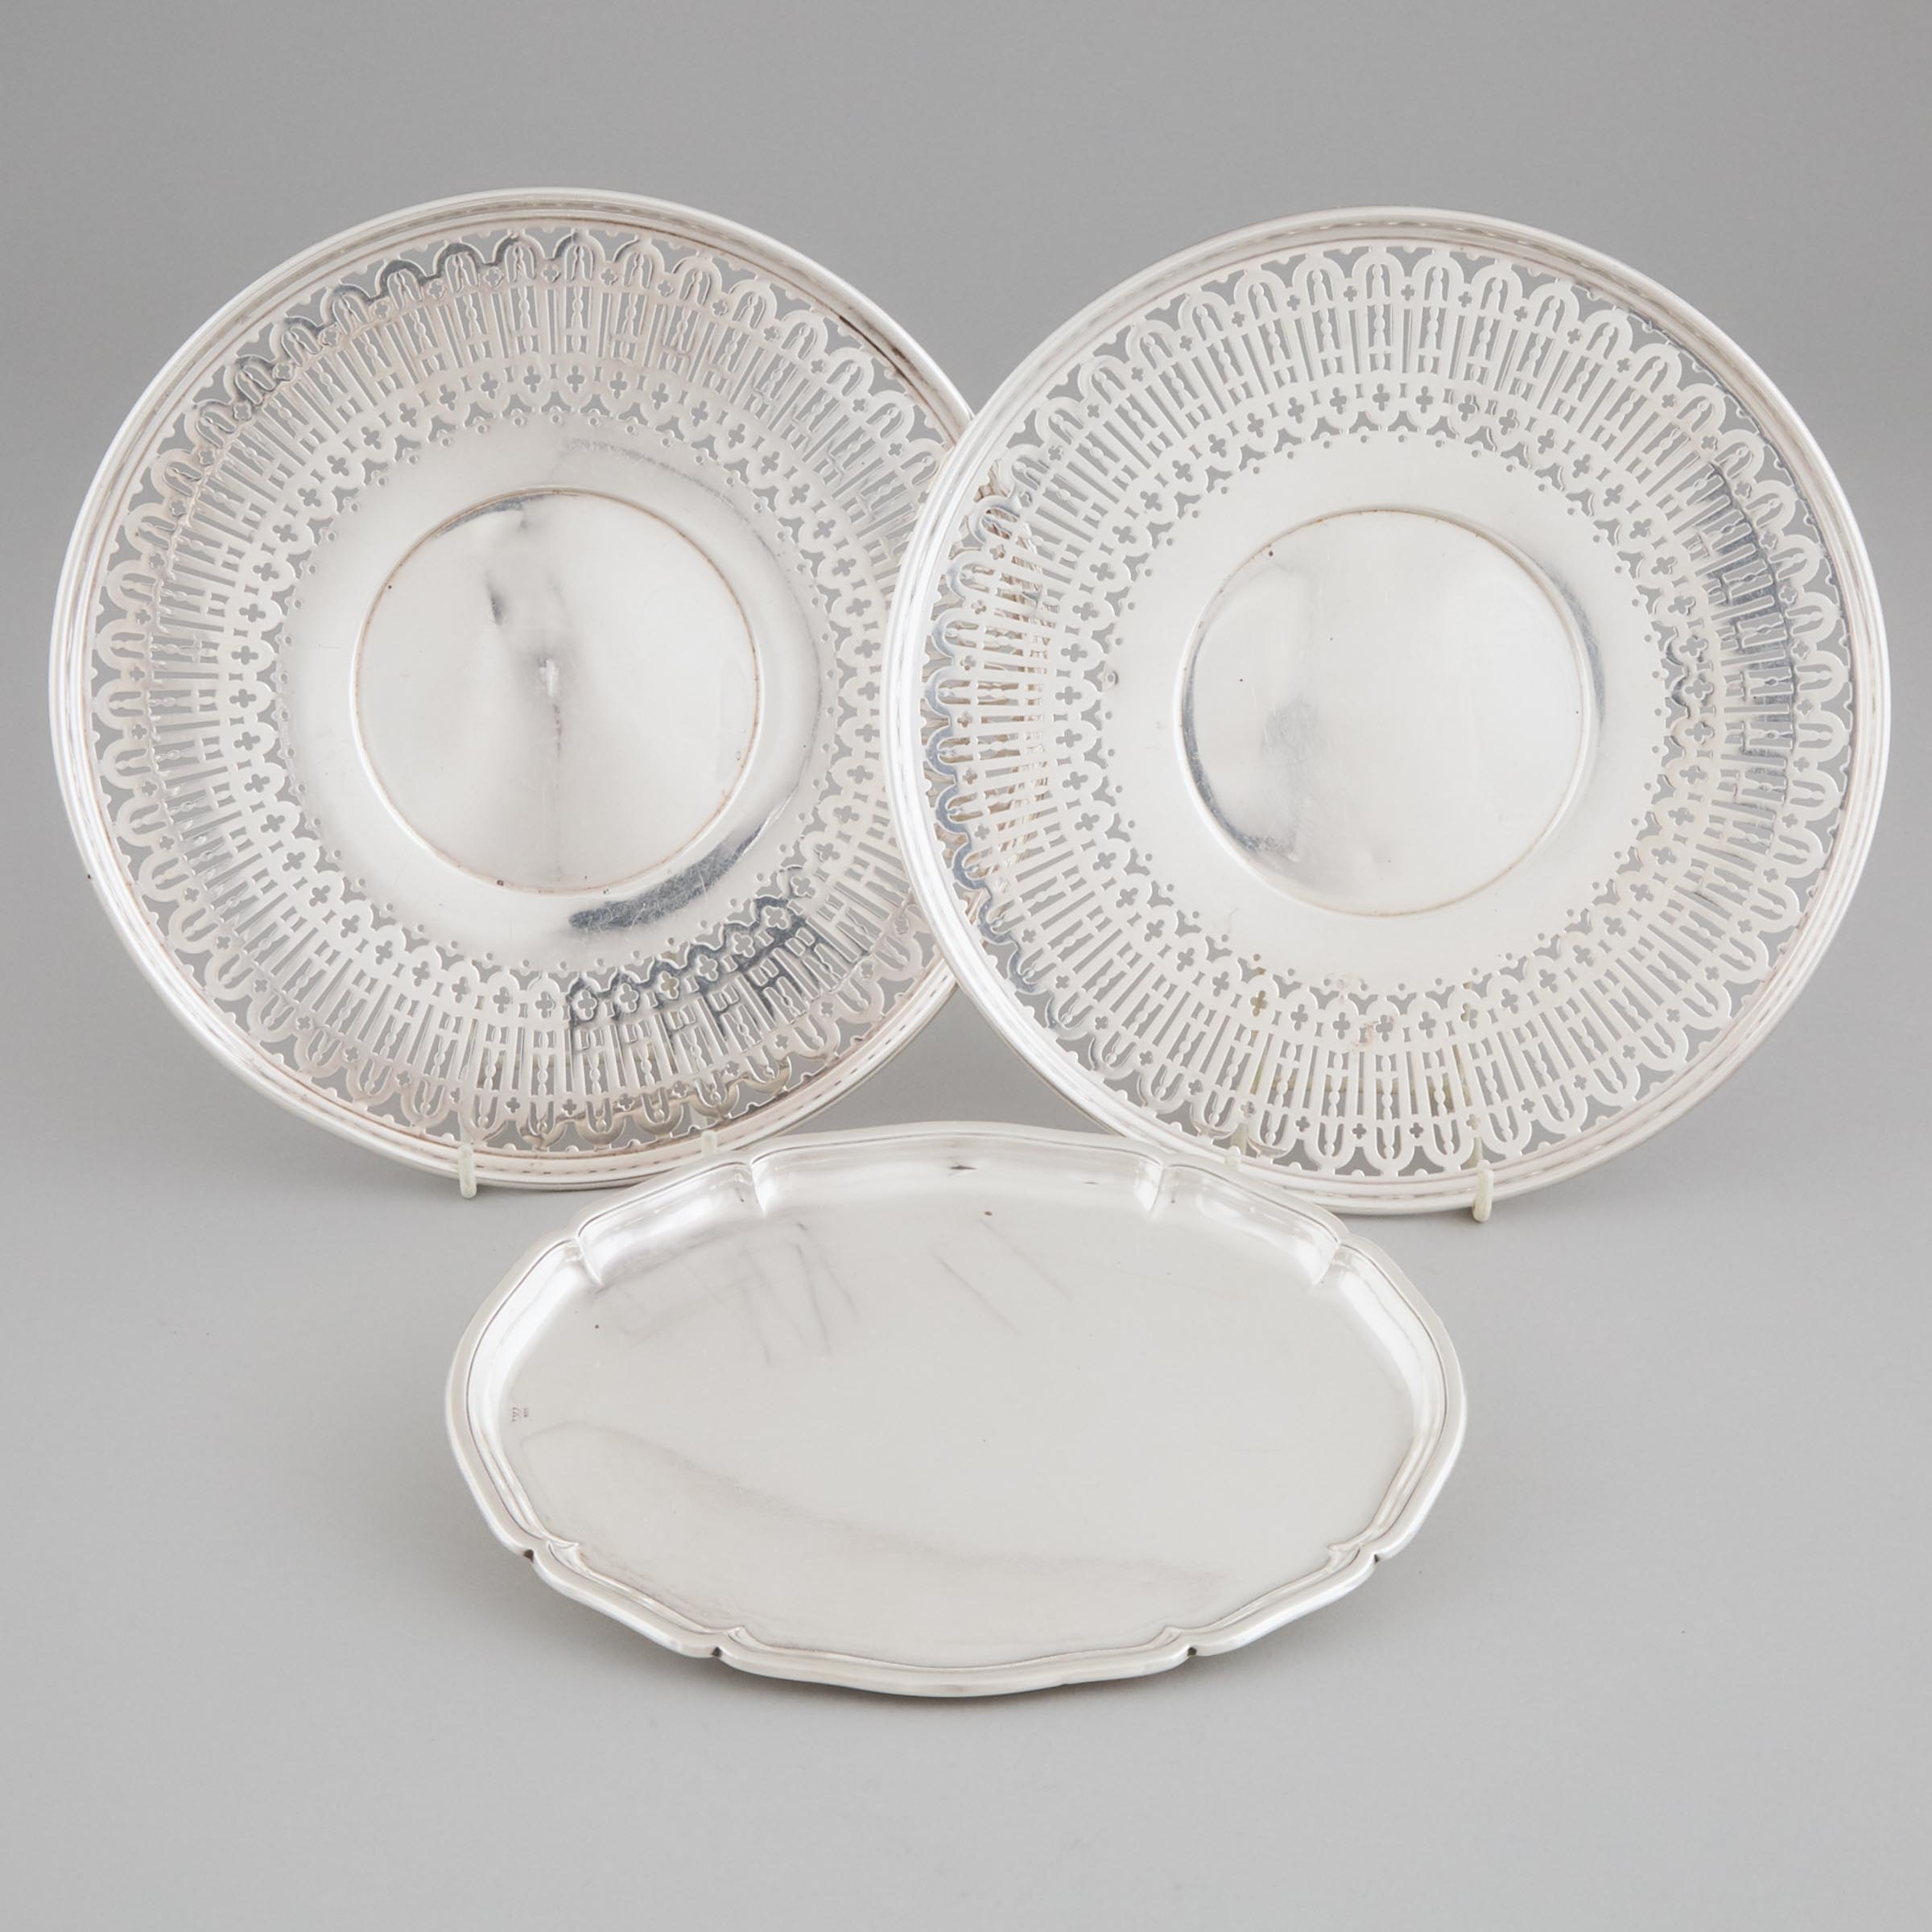 Pair of American Silver Cake Plates and a Continental Small Oval Tray, 20th century